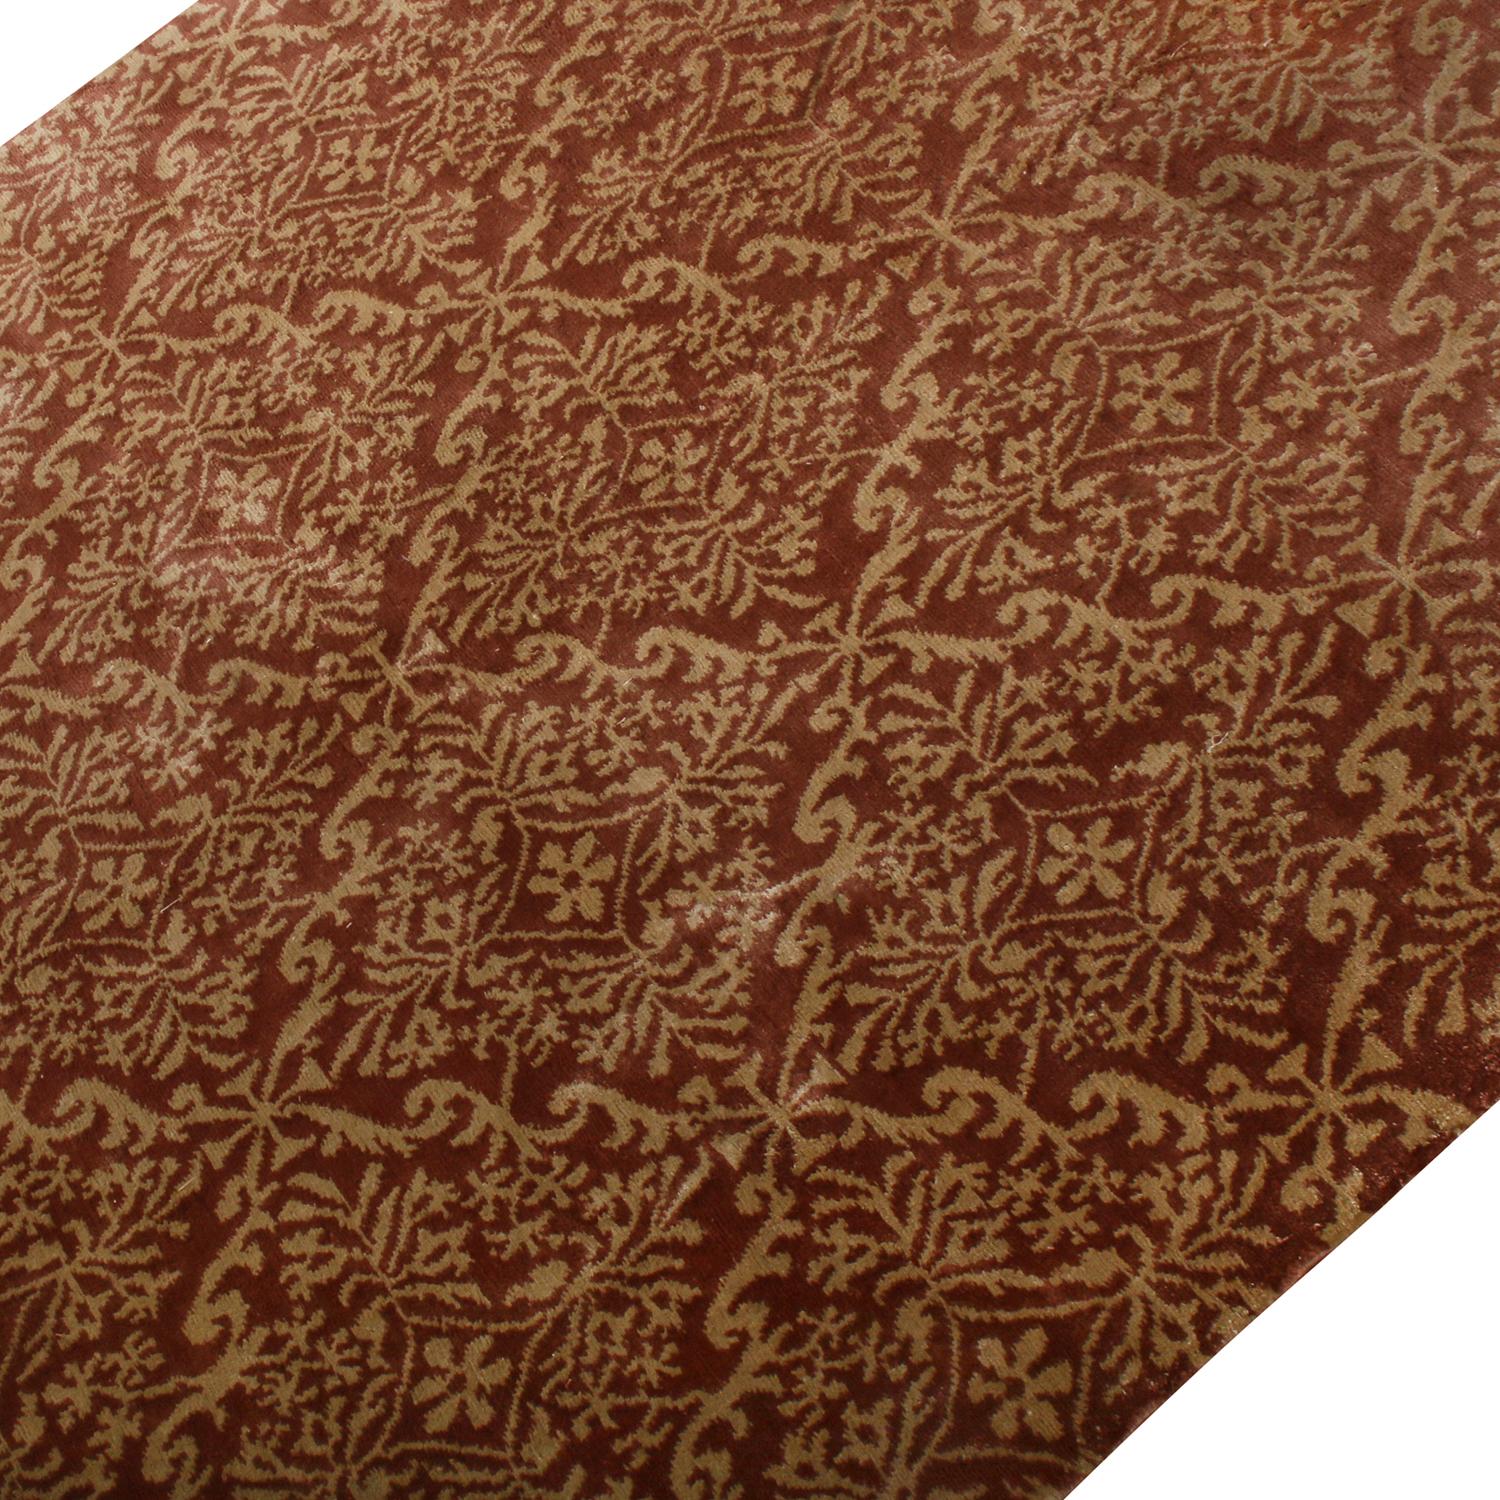 Nepalese Rug & Kilim's Classic European Style Rug in All over Brown, Gold Floral Pattern For Sale